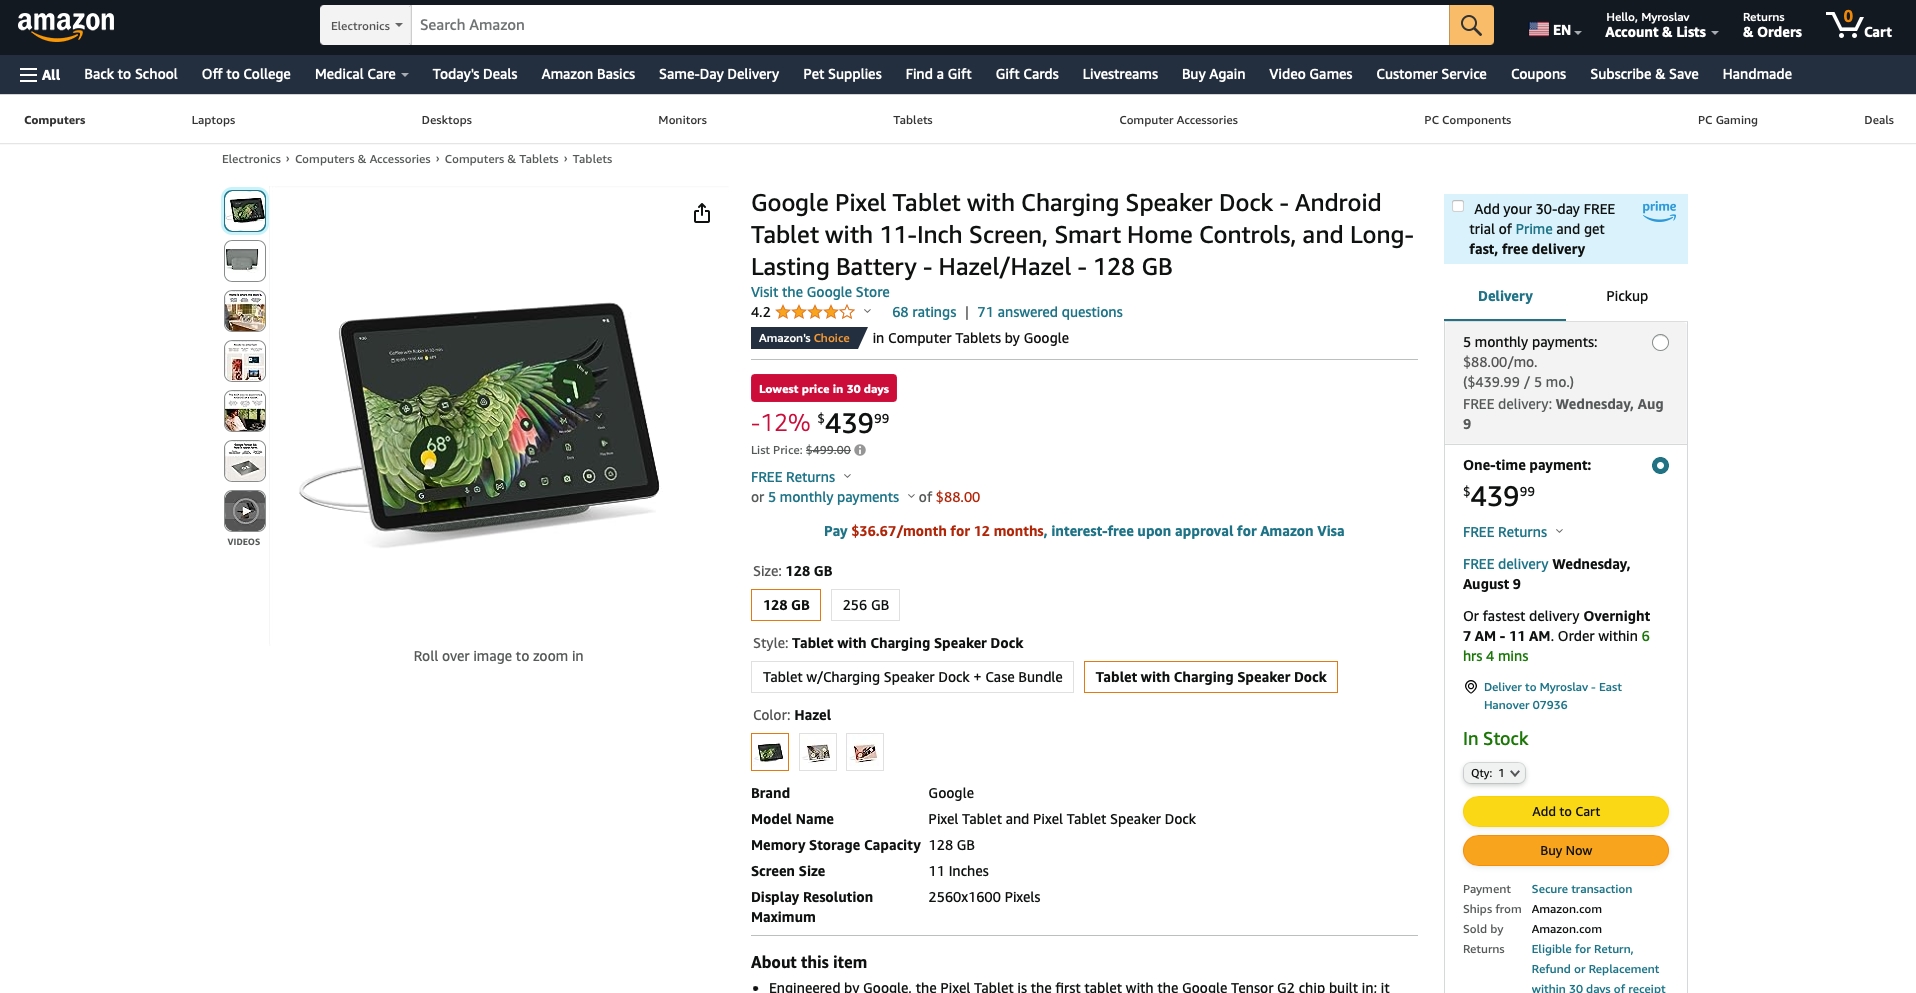 Up to $80 off: the Google Pixel Tablet is on sale on Amazon for a  promotional price